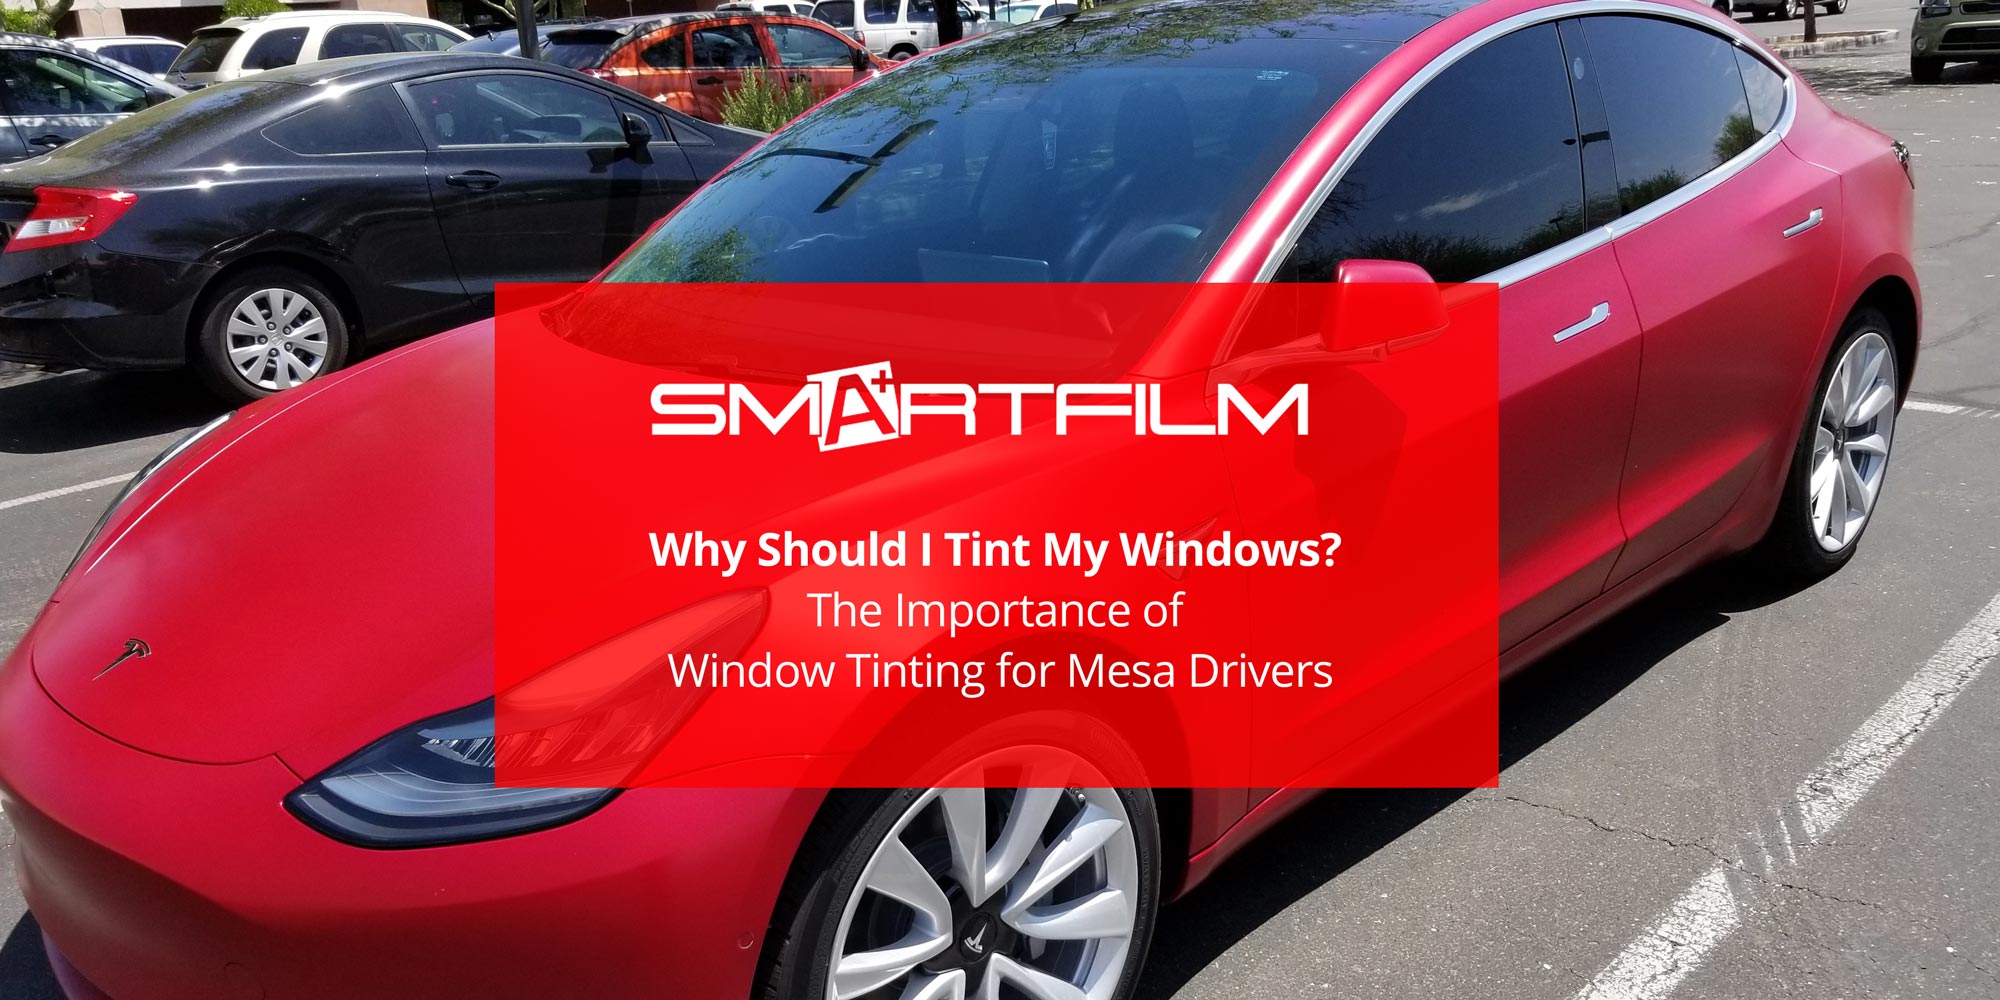 The Importance of Window Tinting for Mesa Drivers